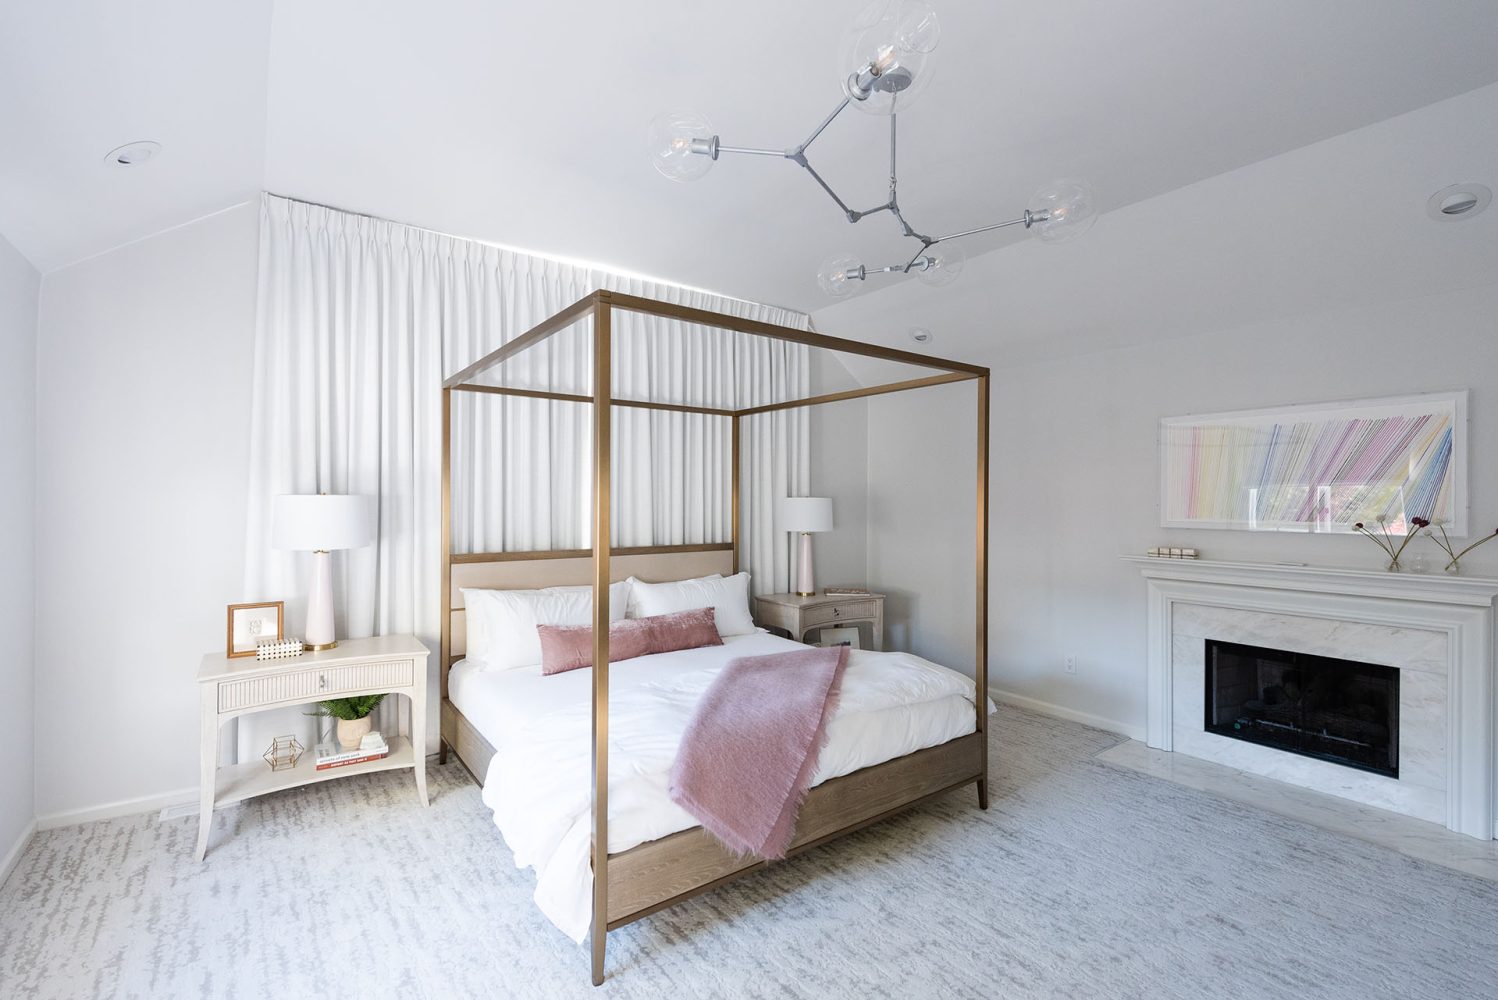 White-walled bedroom with white and grey patterned carpeting. Large, modern brass and wood canopy bed with white bedding and mauve bolster pillow and throw. Modern sliver chandelier, white marble surround fireplace.